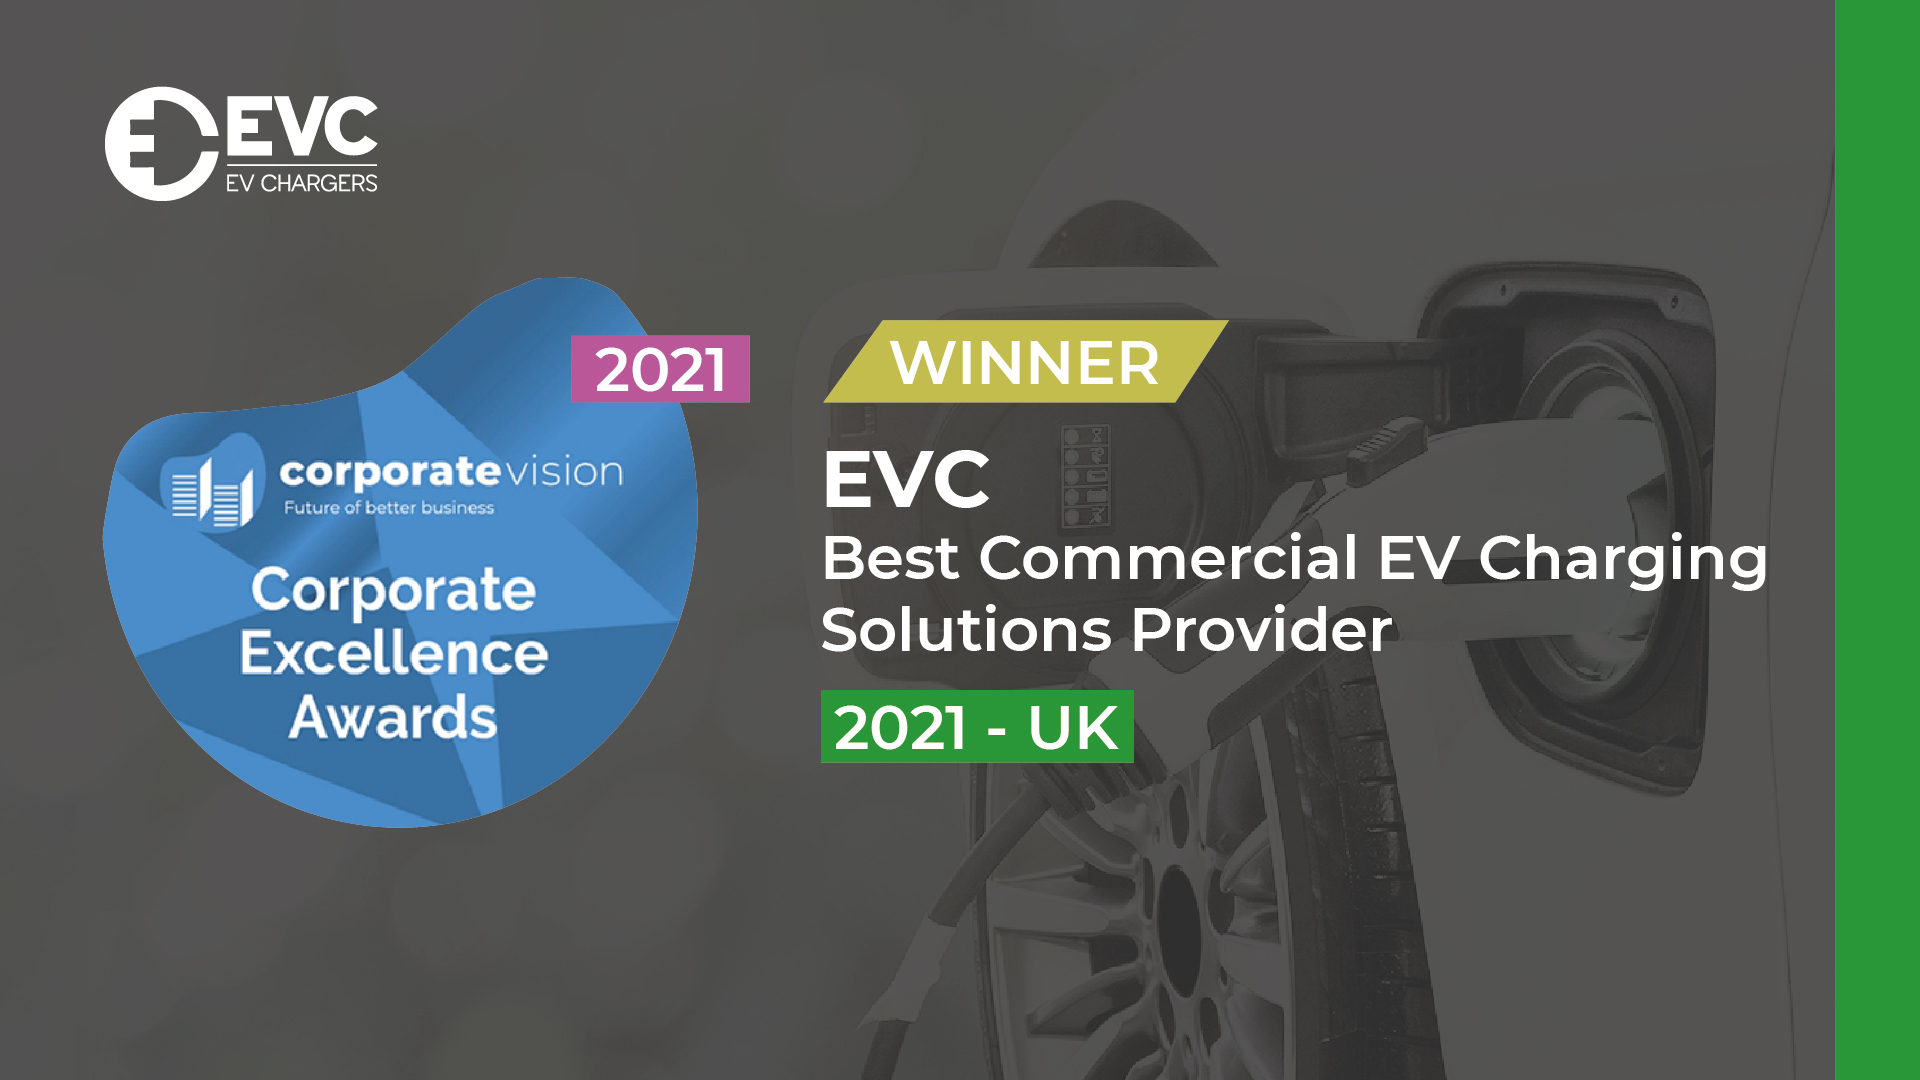 EVC named Best Commercial EV Charging Solutions Provider in the UK for 2021